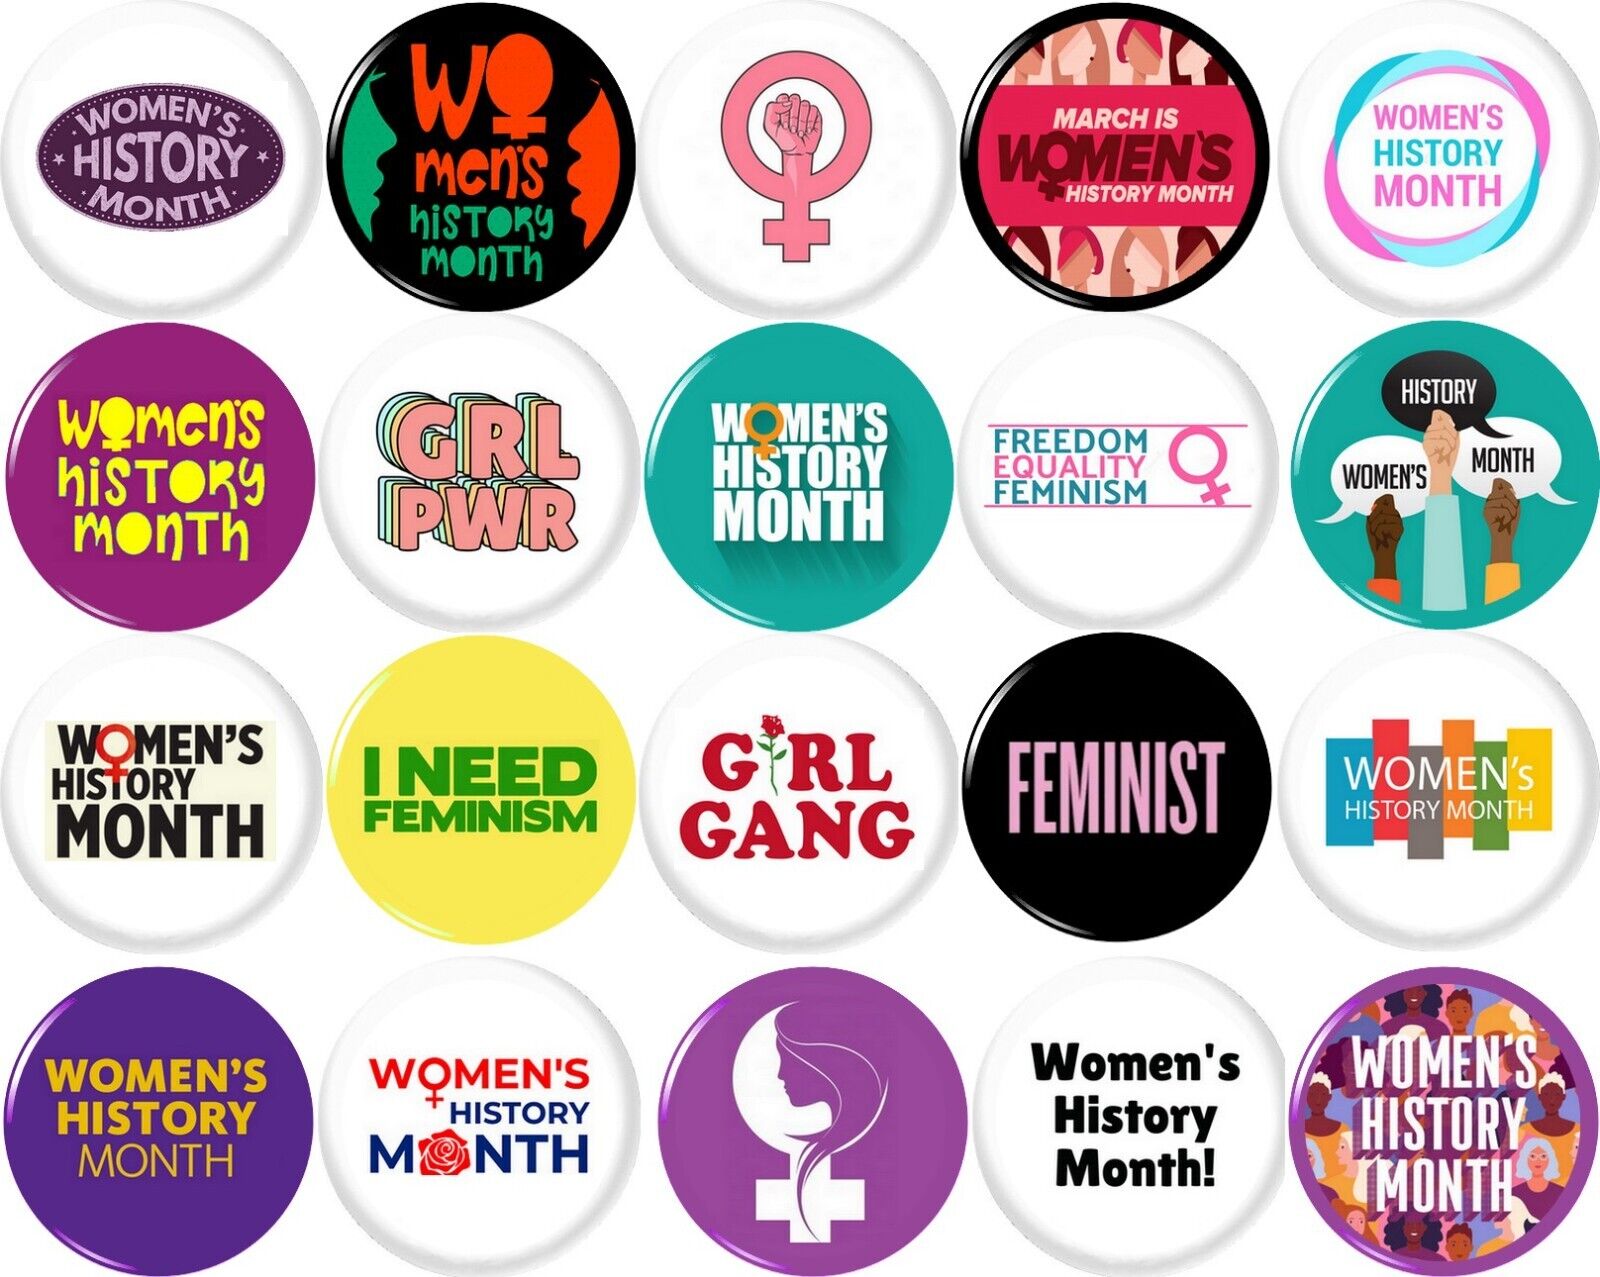 WOMEN'S HISTORY MONTH x 20 NEW 1 Inch (25mm) FEMINIST Buttons Badges Pins